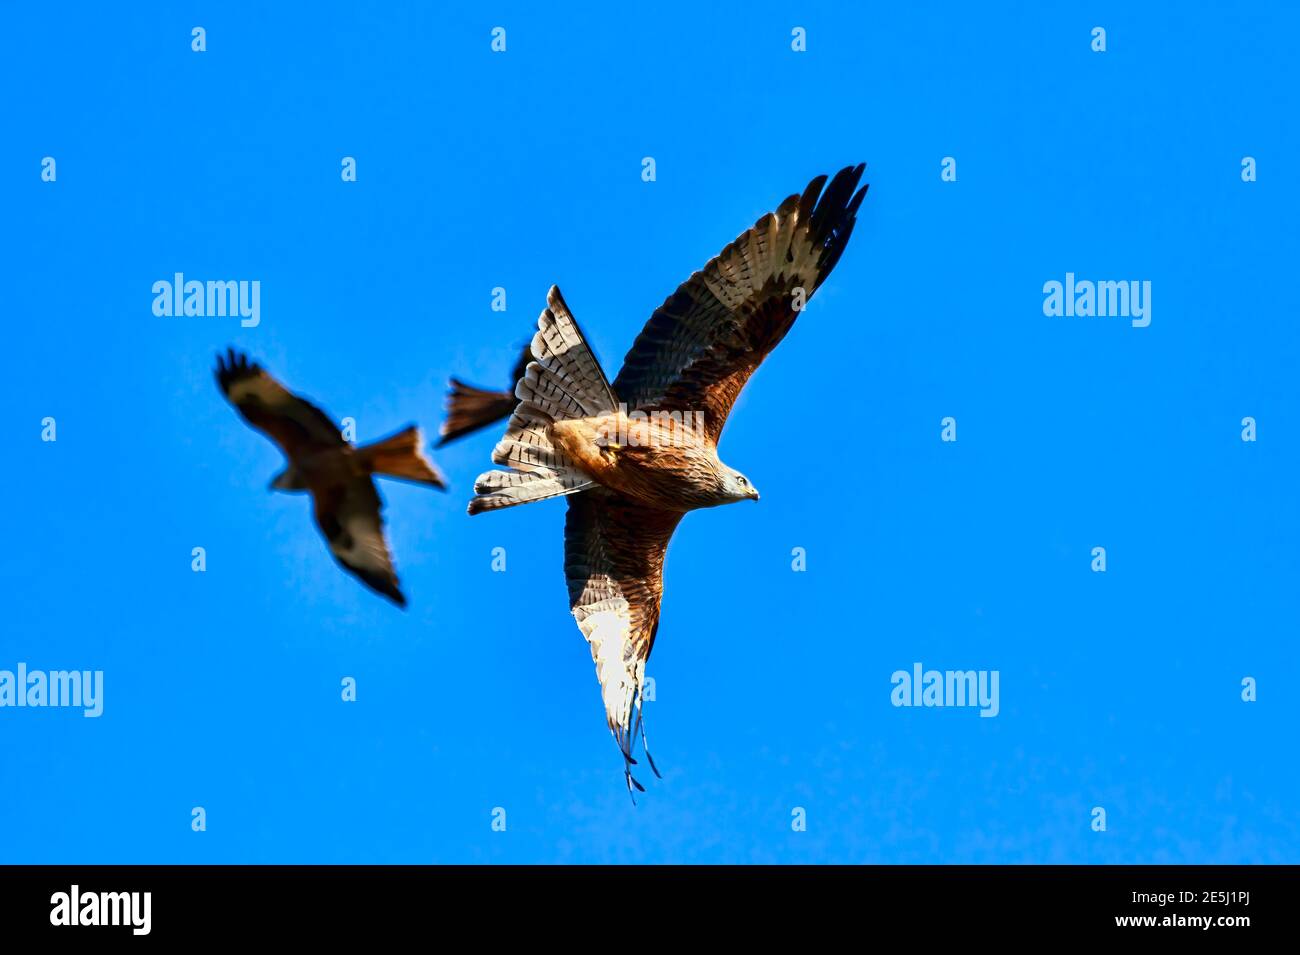 Red Kite (Milvus milvus) raptor bird of prey in flight at the feeding centre in South Wales with a blue sky, stock photo image Stock Photo